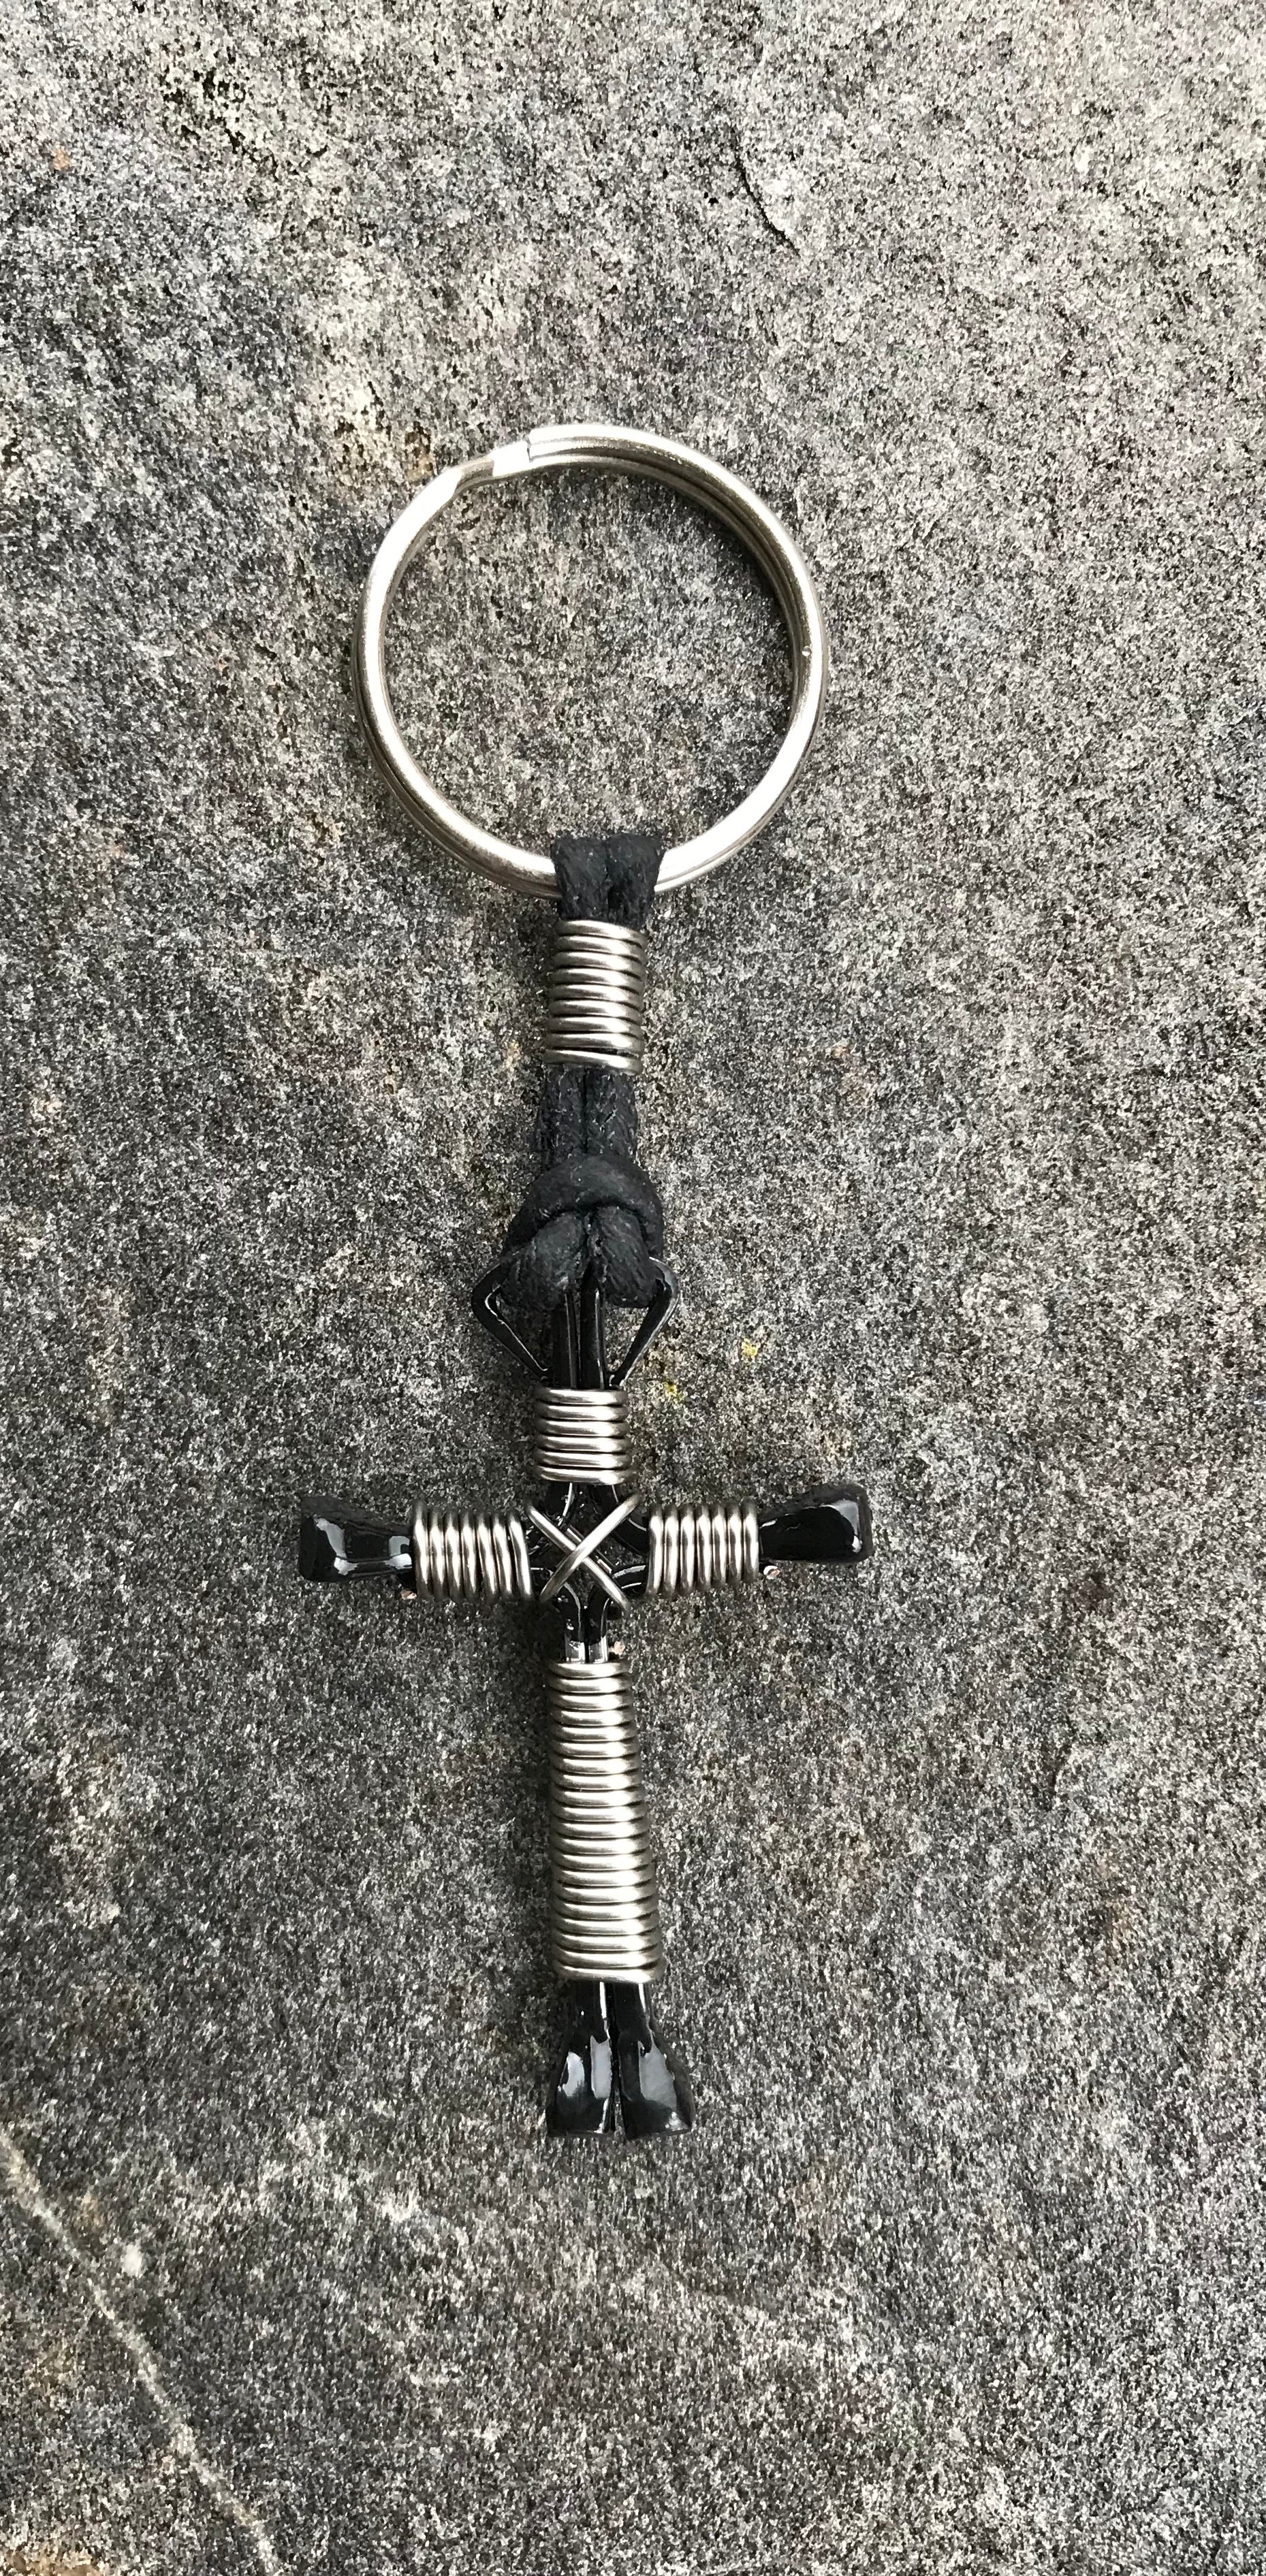 Silver Horseshoe Nail Cross Keychain with Black Nails